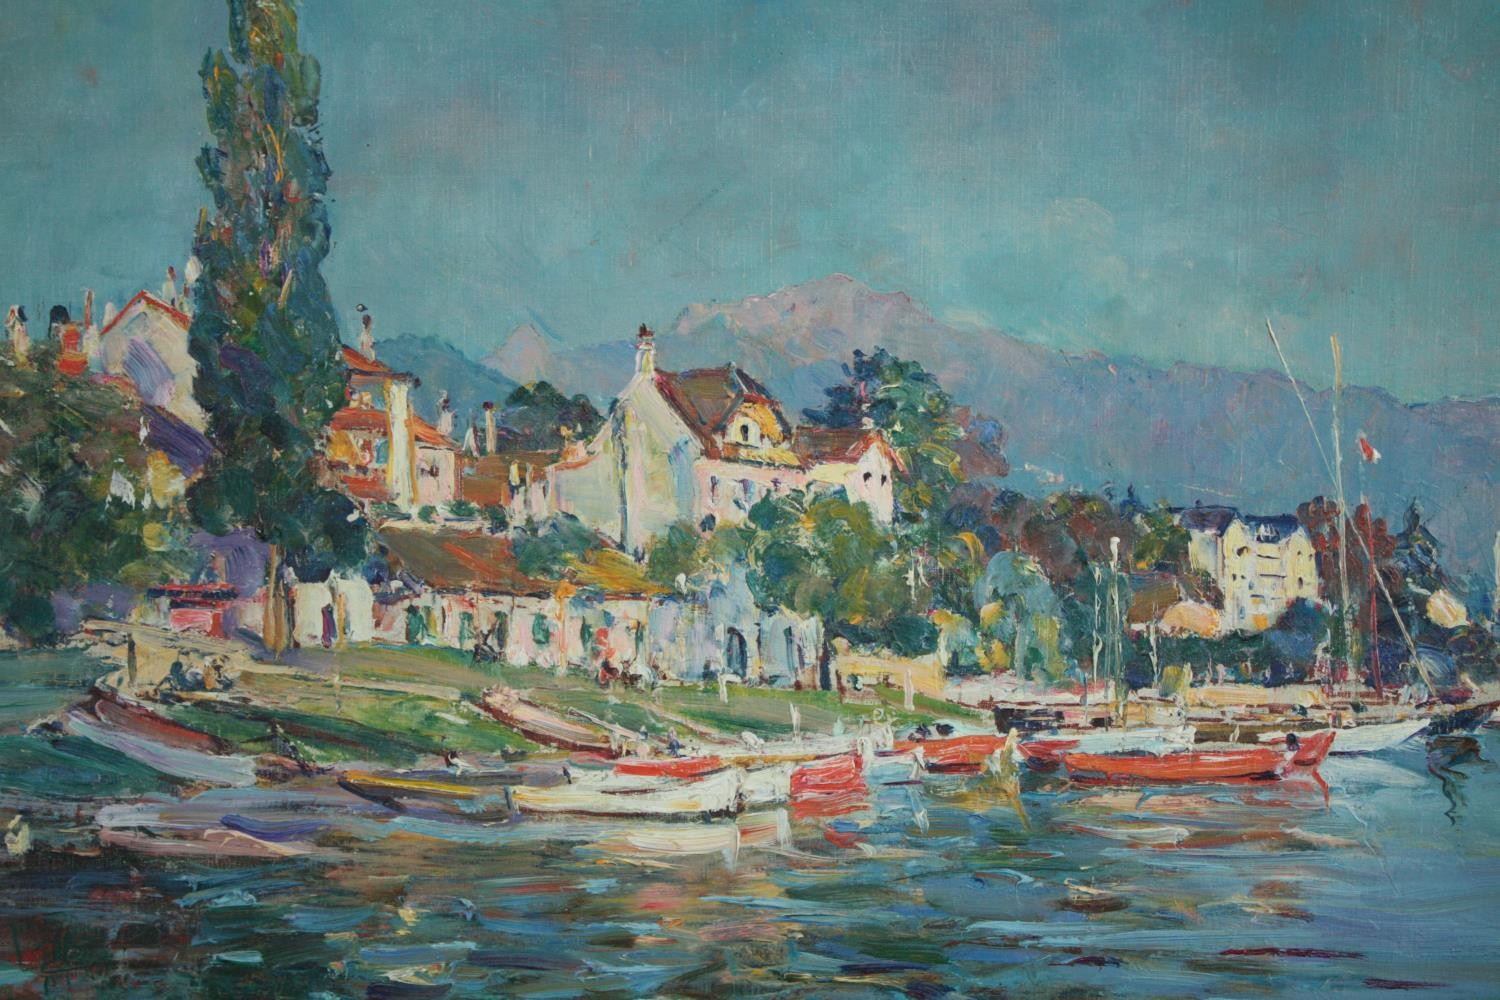 Olga Slom (1881-1940). A Swiss river scene. Signed lower right. Oil on canvas. H.50 W.67 cm.